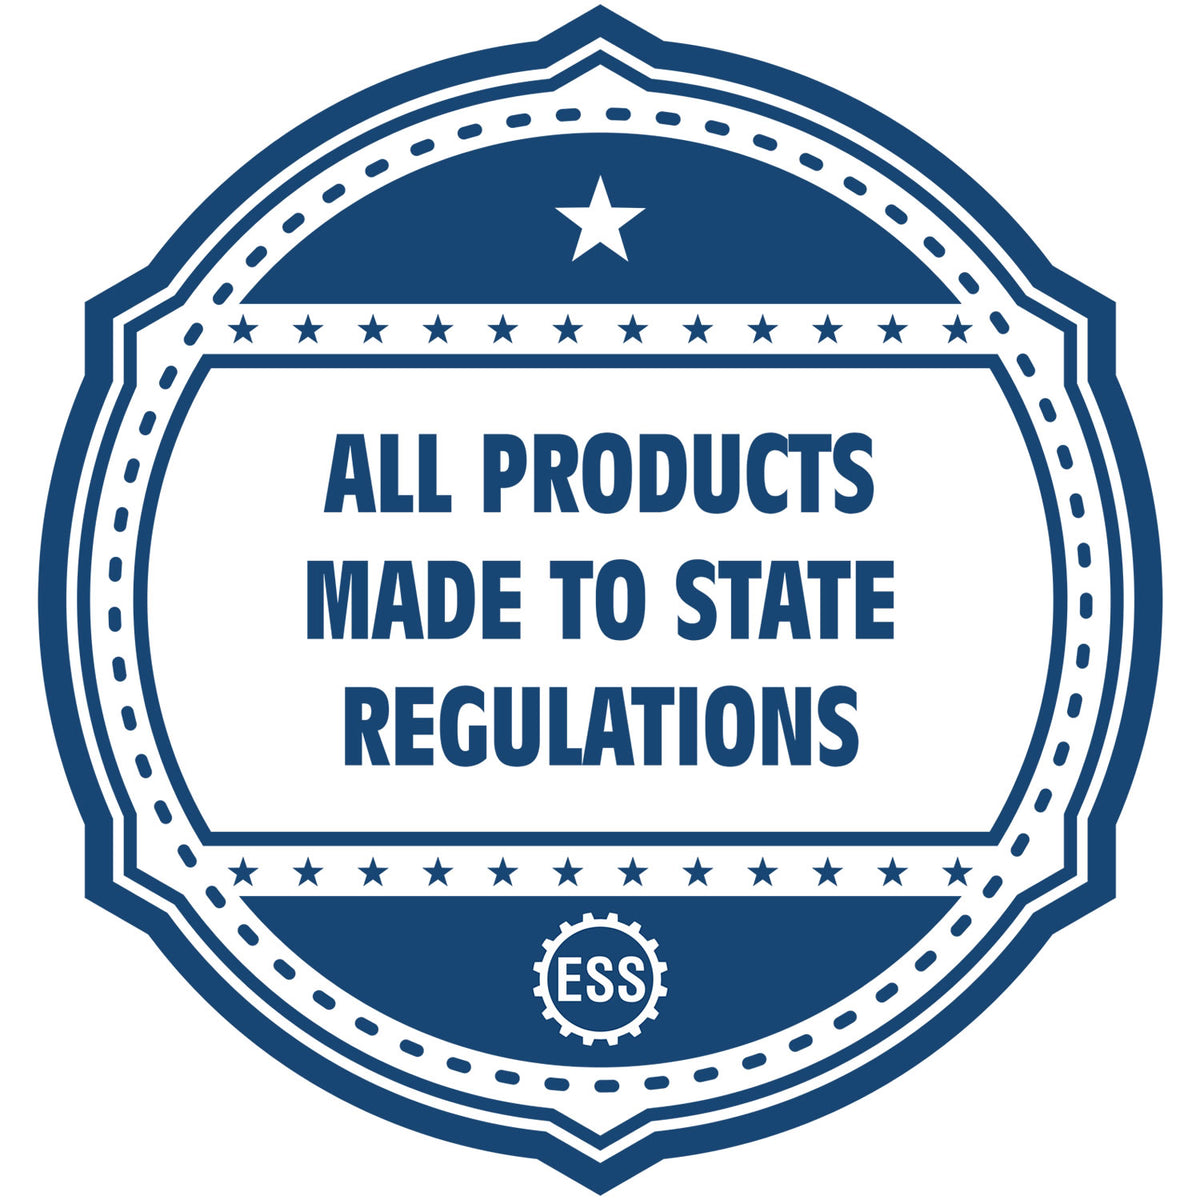 An icon or badge element for the State of Kentucky Extended Long Reach Engineer Seal showing that this product is made in compliance with state regulations.